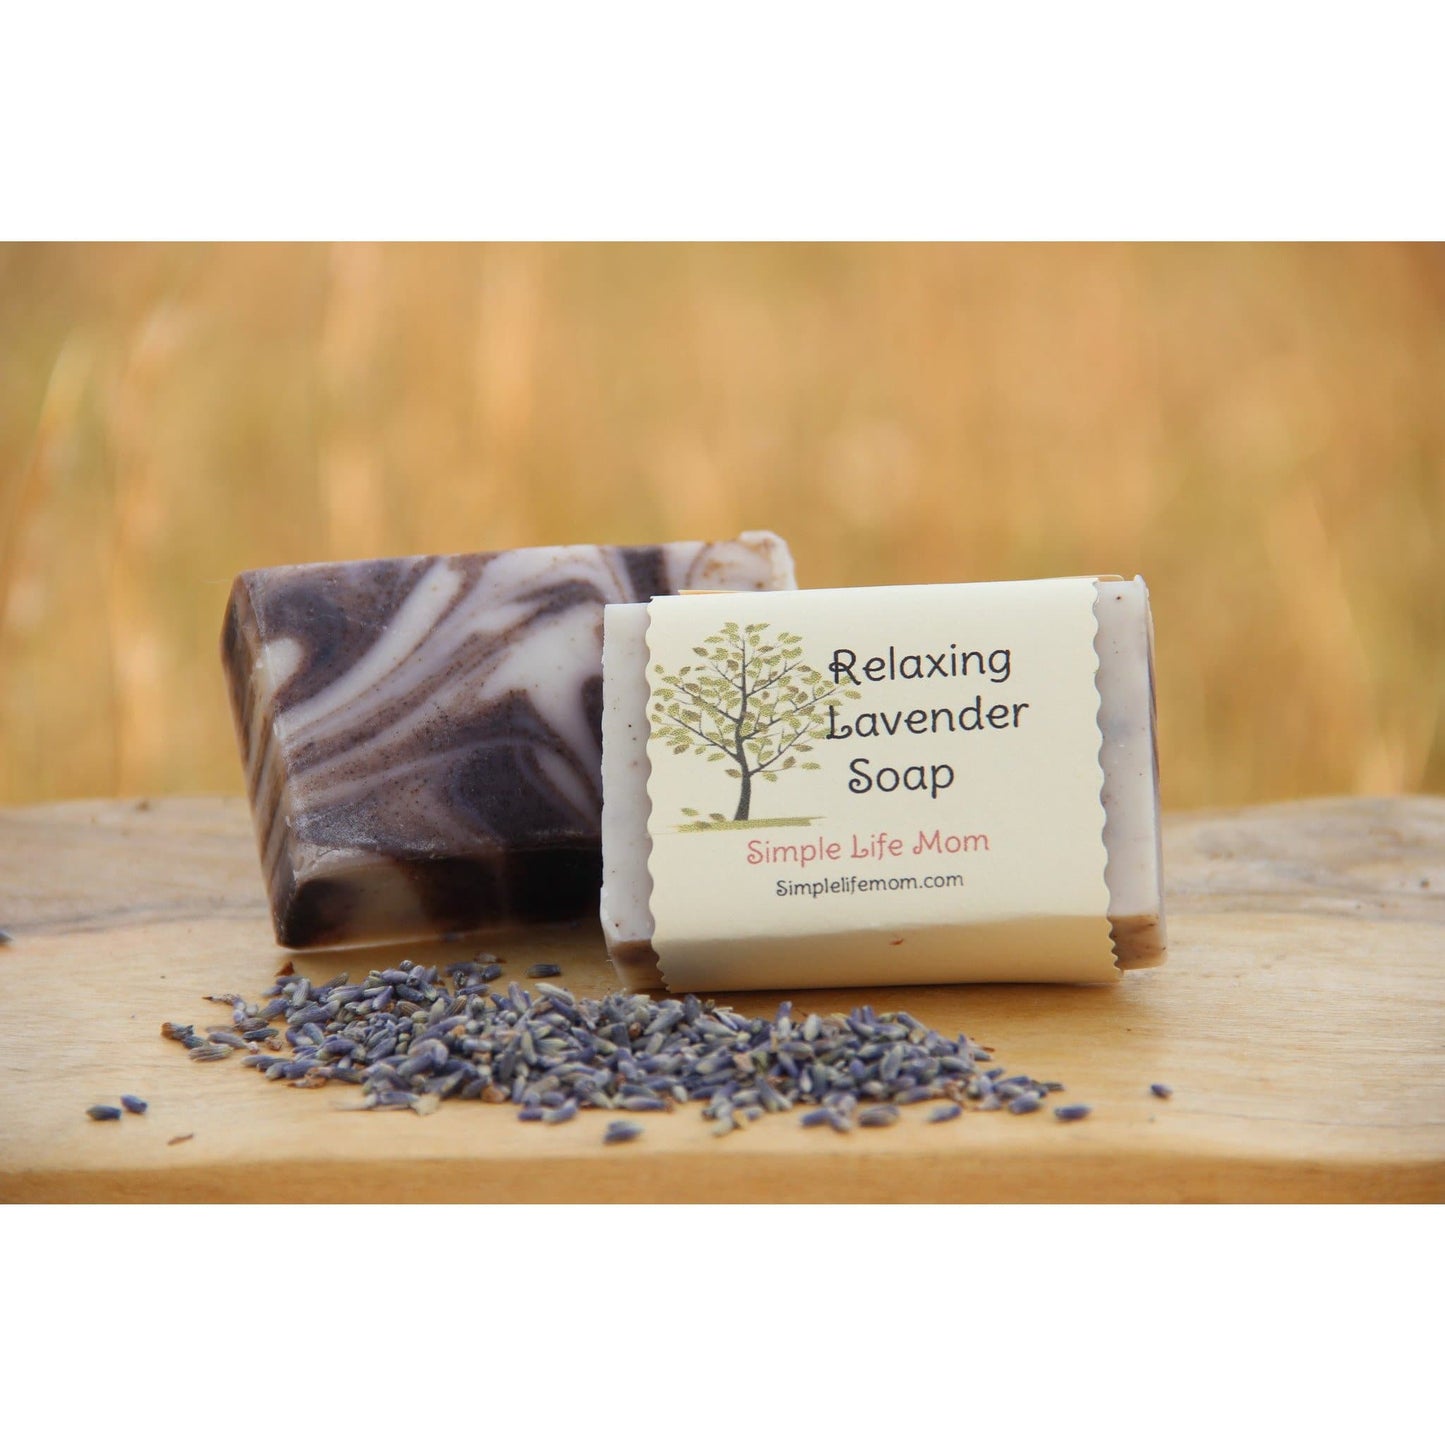 Simple Life Mom - Relaxing Lavender Soap 4 oz.